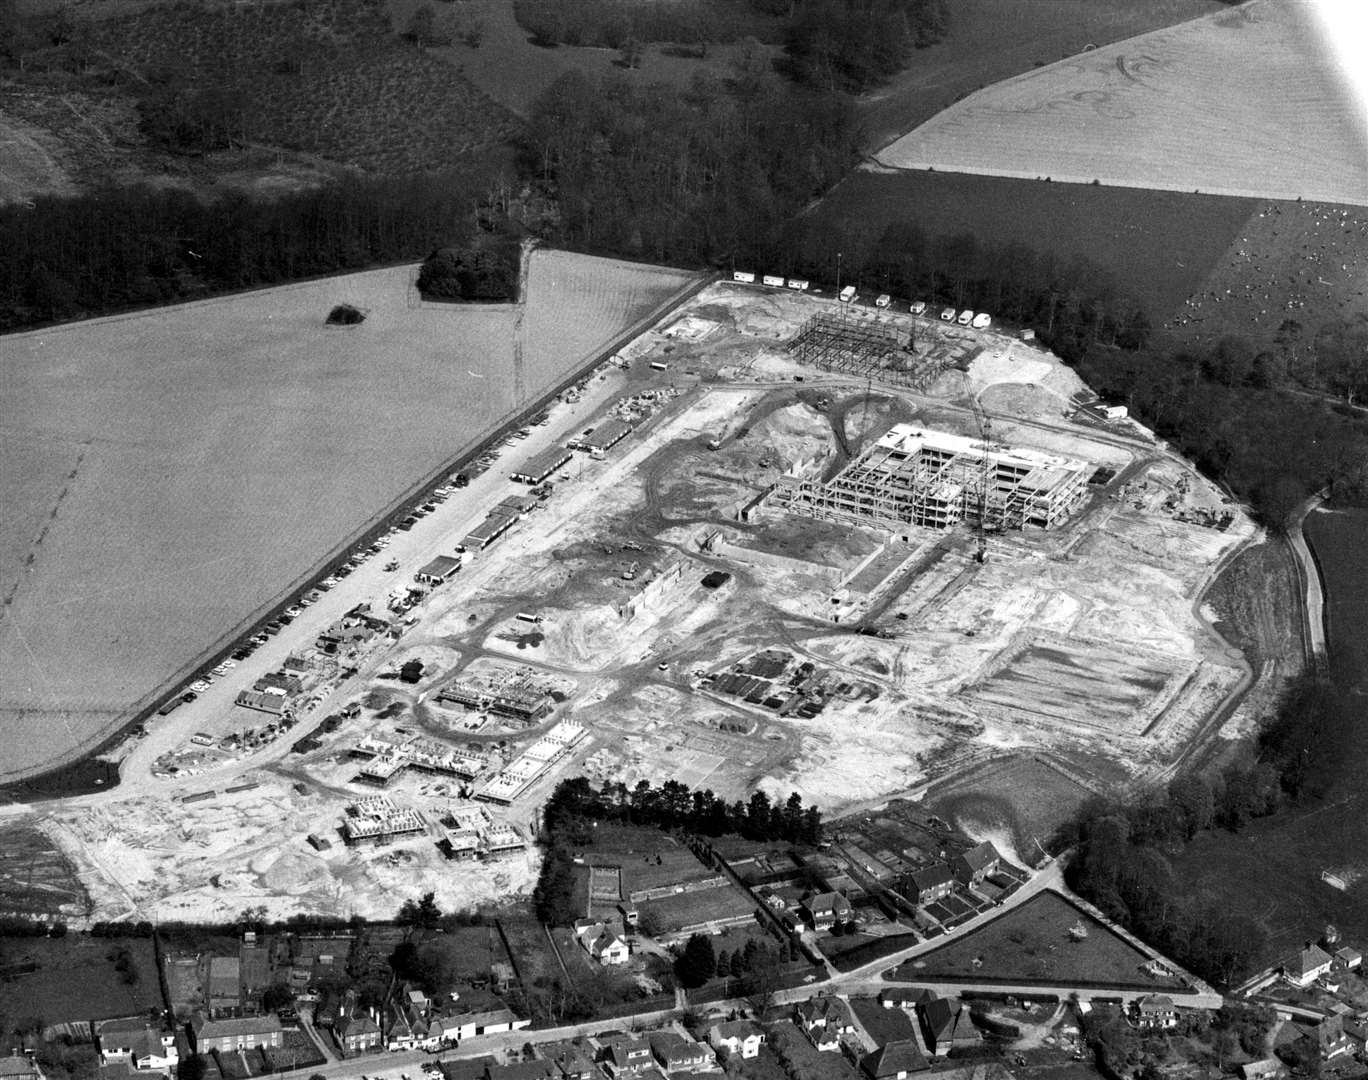 The huge site under construction in 1973. Picture courtesy Steve Salter